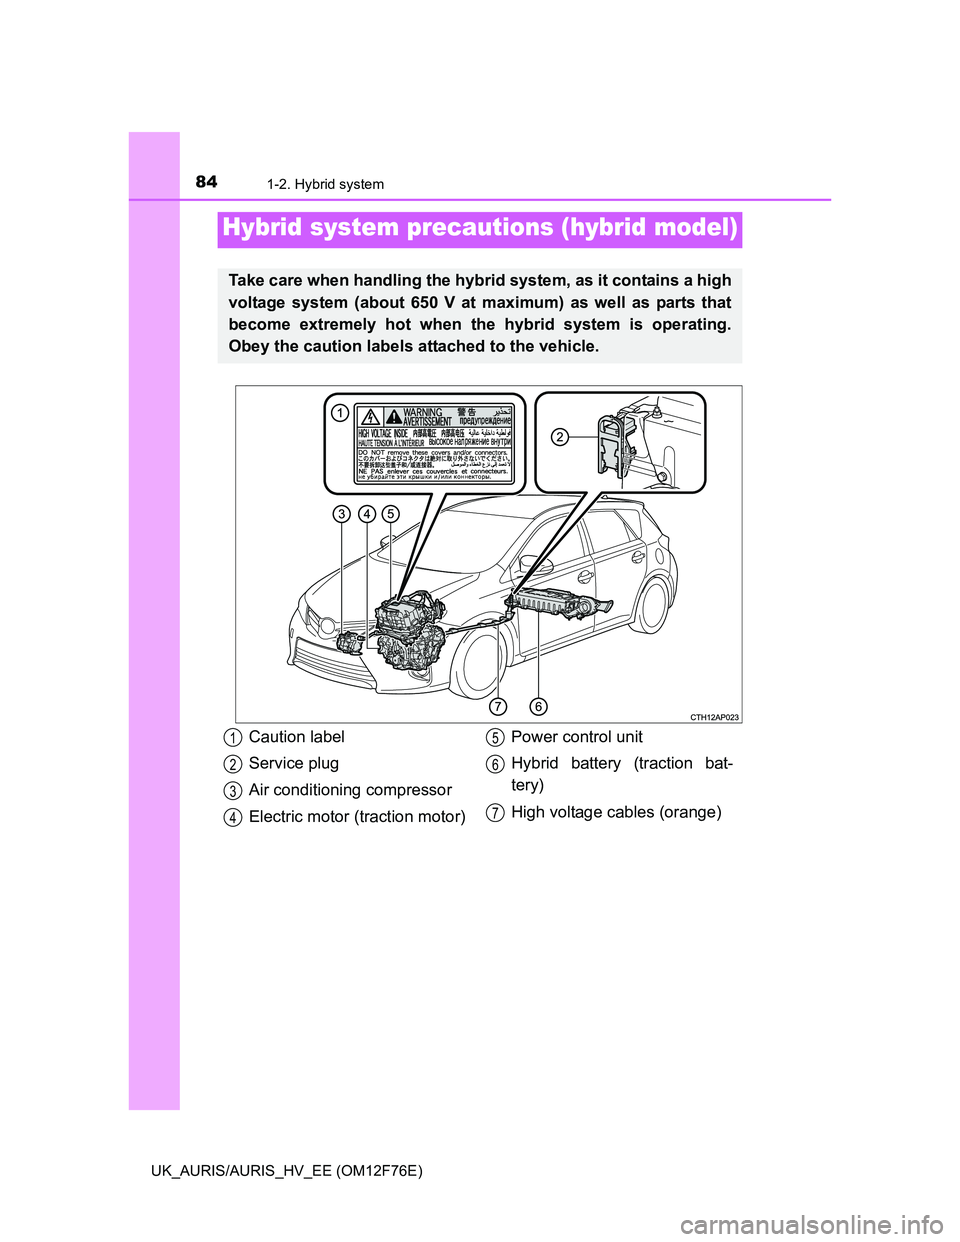 TOYOTA AURIS 2013  Owners Manual (in English) 841-2. Hybrid system
UK_AURIS/AURIS_HV_EE (OM12F76E)
Hybrid system precautions (hybrid model)
Take care when handling the hybrid system, as it contains a high
voltage system (about 650 V at maximum) a